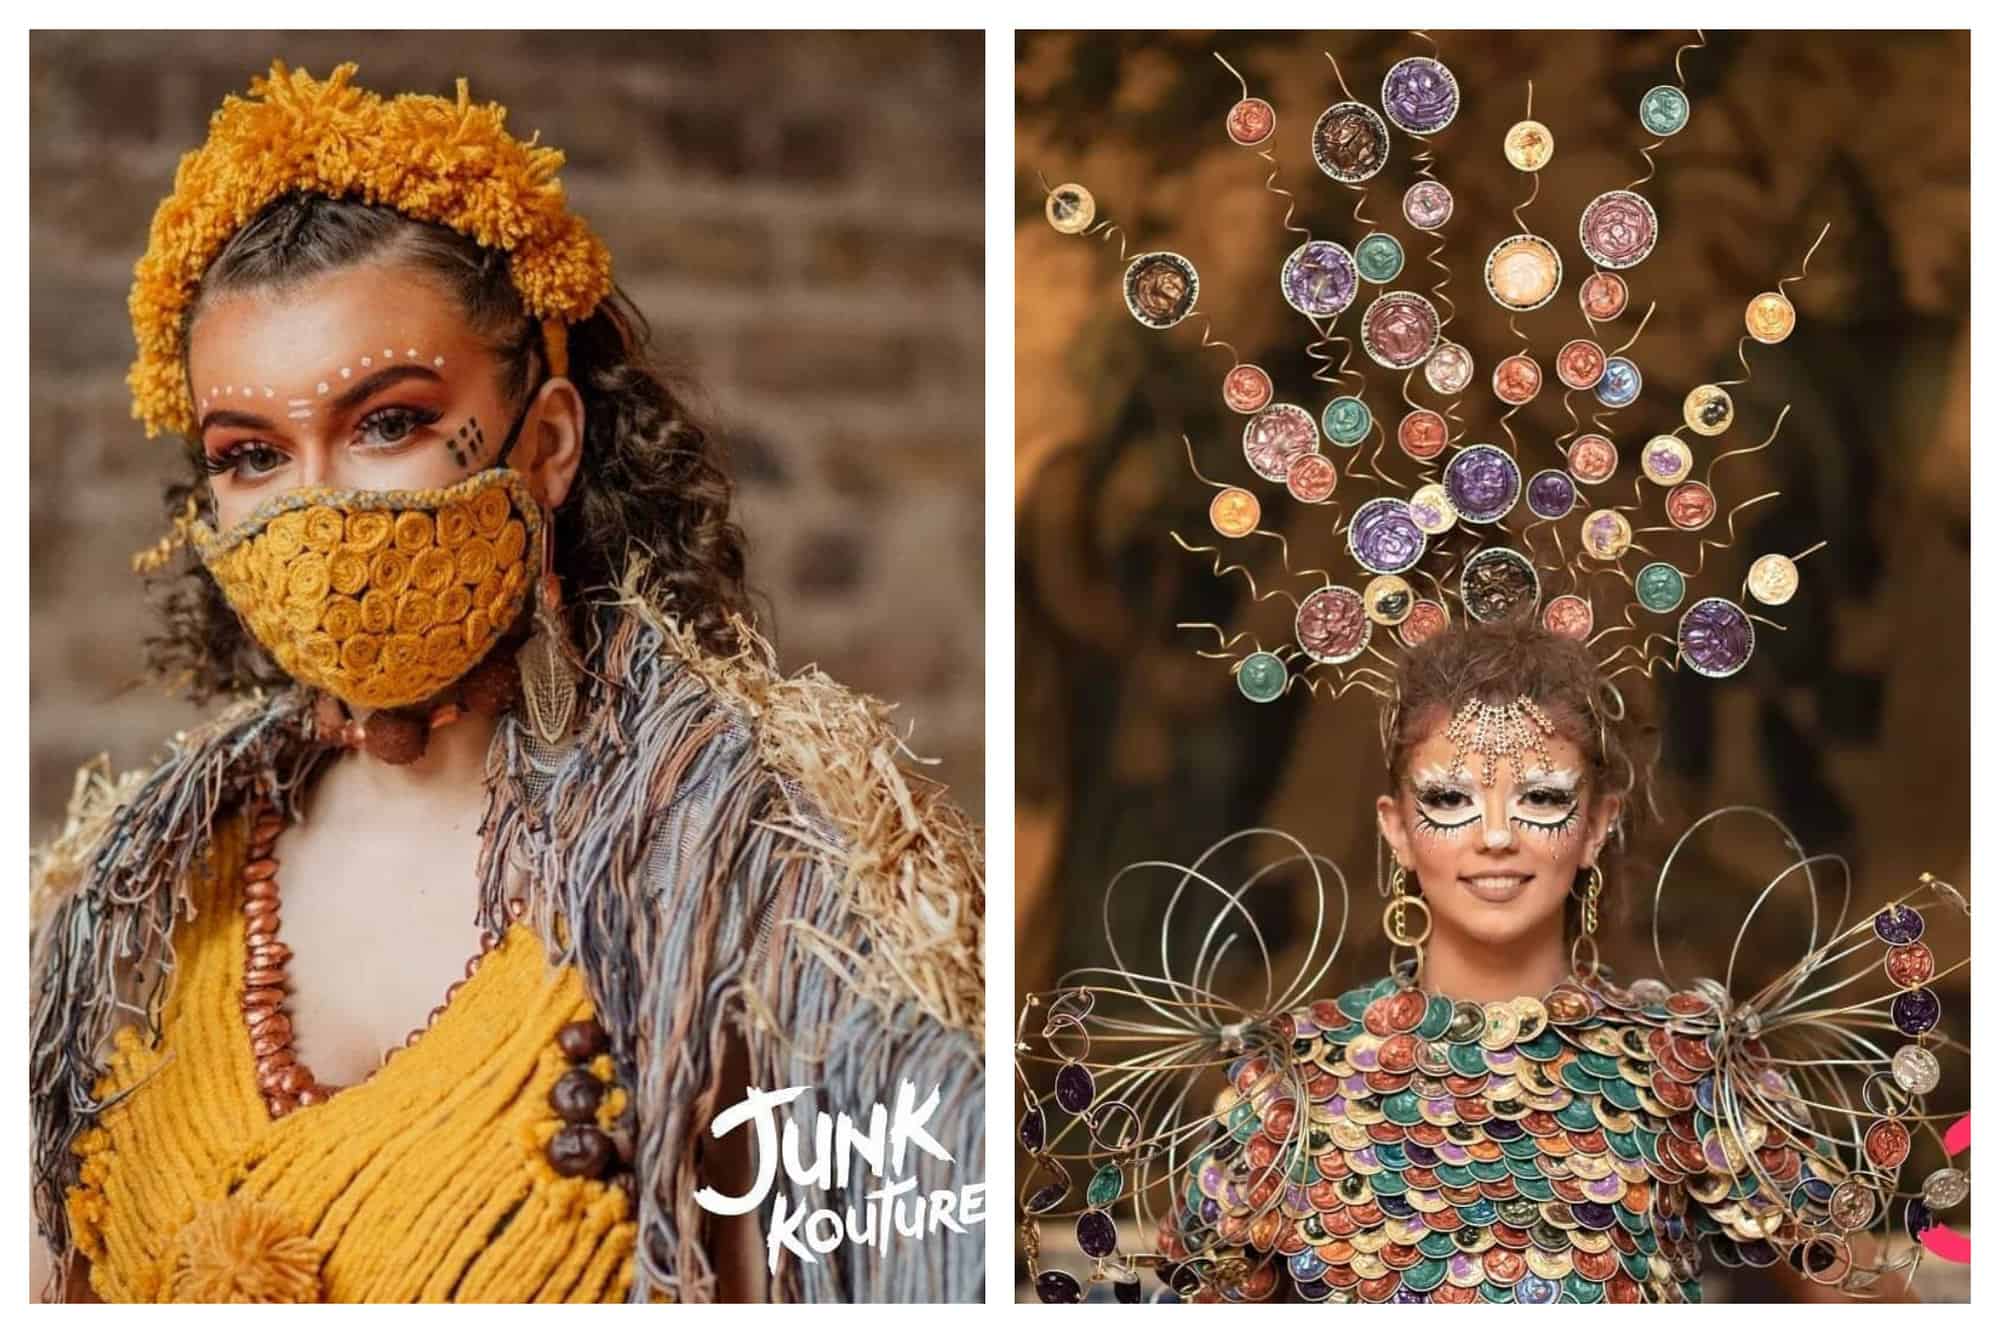 2 pictures from sustainable fashion brand Junk Kouture. Left: A woman in a creative ensemble of recycled materials -- yellow headband, mask and top. Right: A woman smiles in her costume of recycled metallic rings in purple, yellow, orange, and green. She also wears a tall headdress made of the same materials.